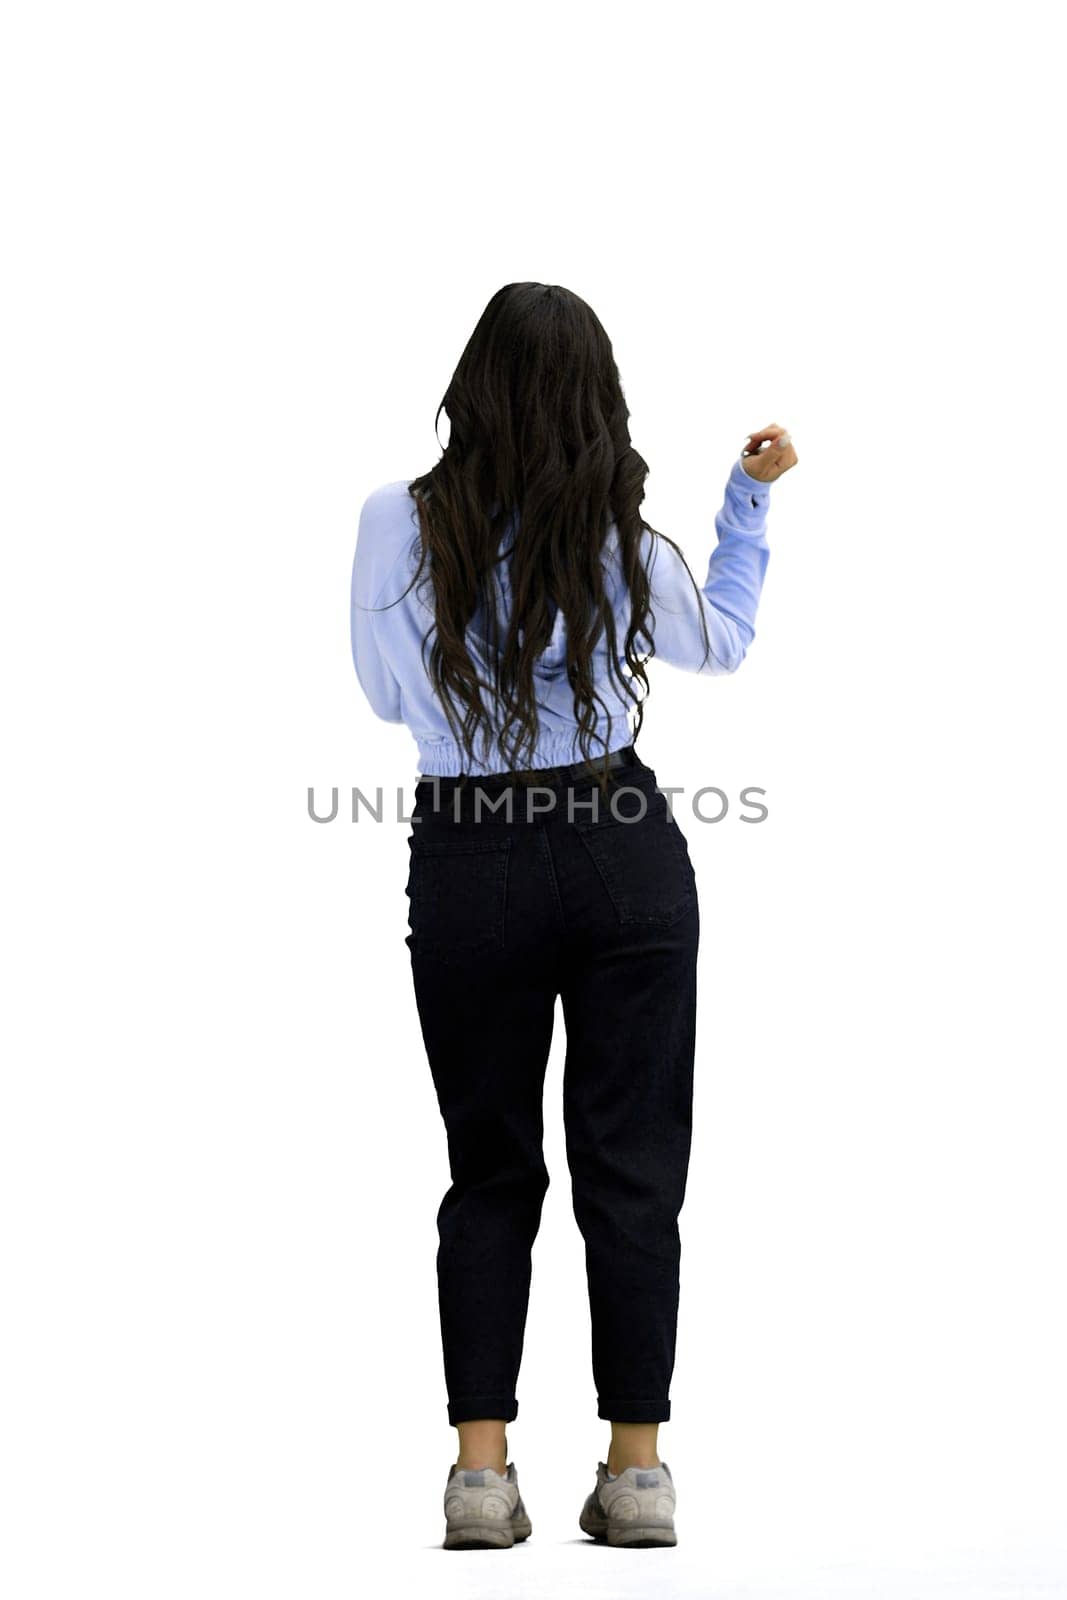 A woman, full-length, on a white background.